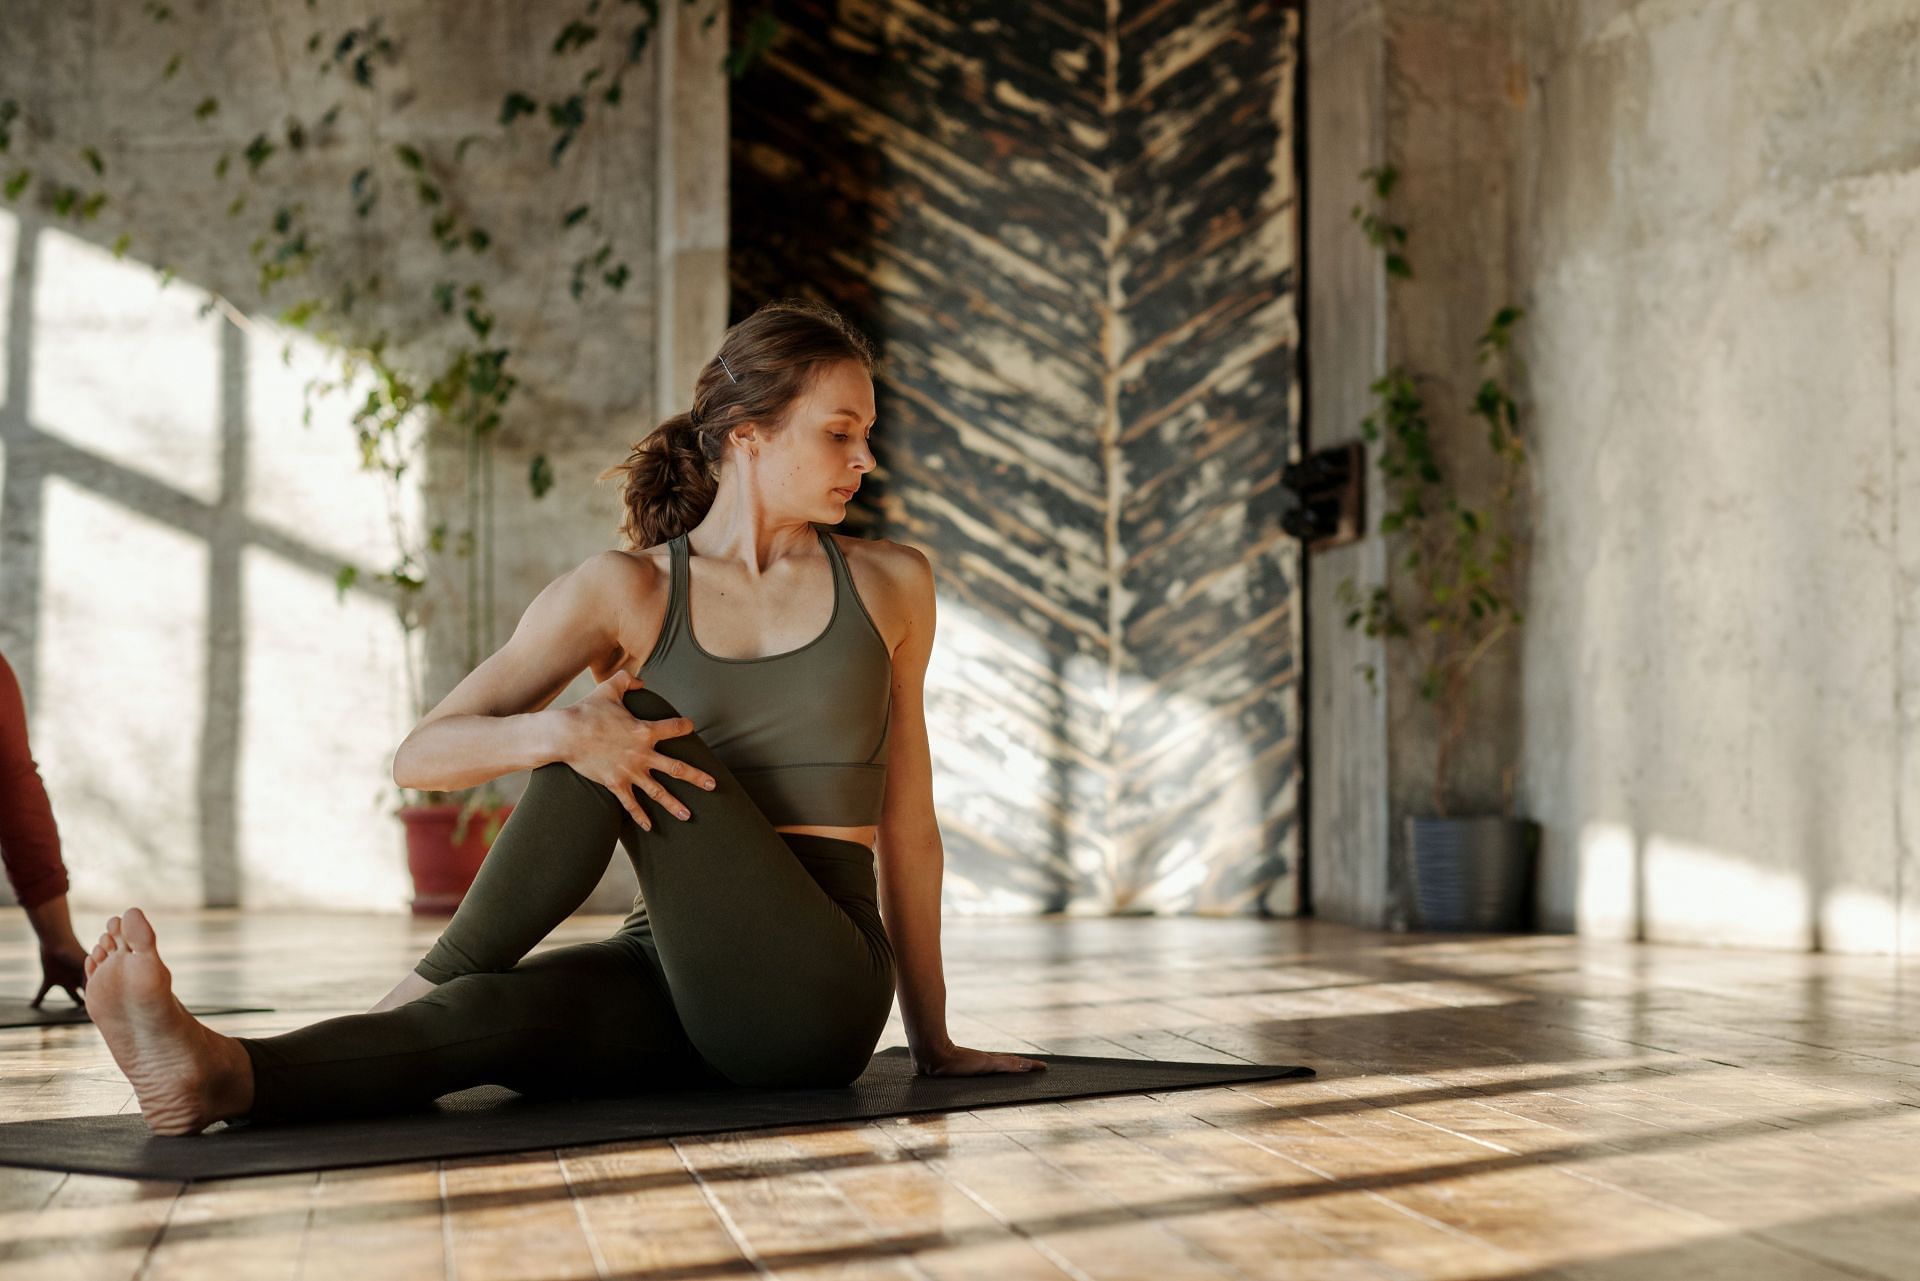 Easy yoga poses can help people with Irritable bowel syndrome (IBS) symptoms. (Image via Pexels / Cliff Booth)